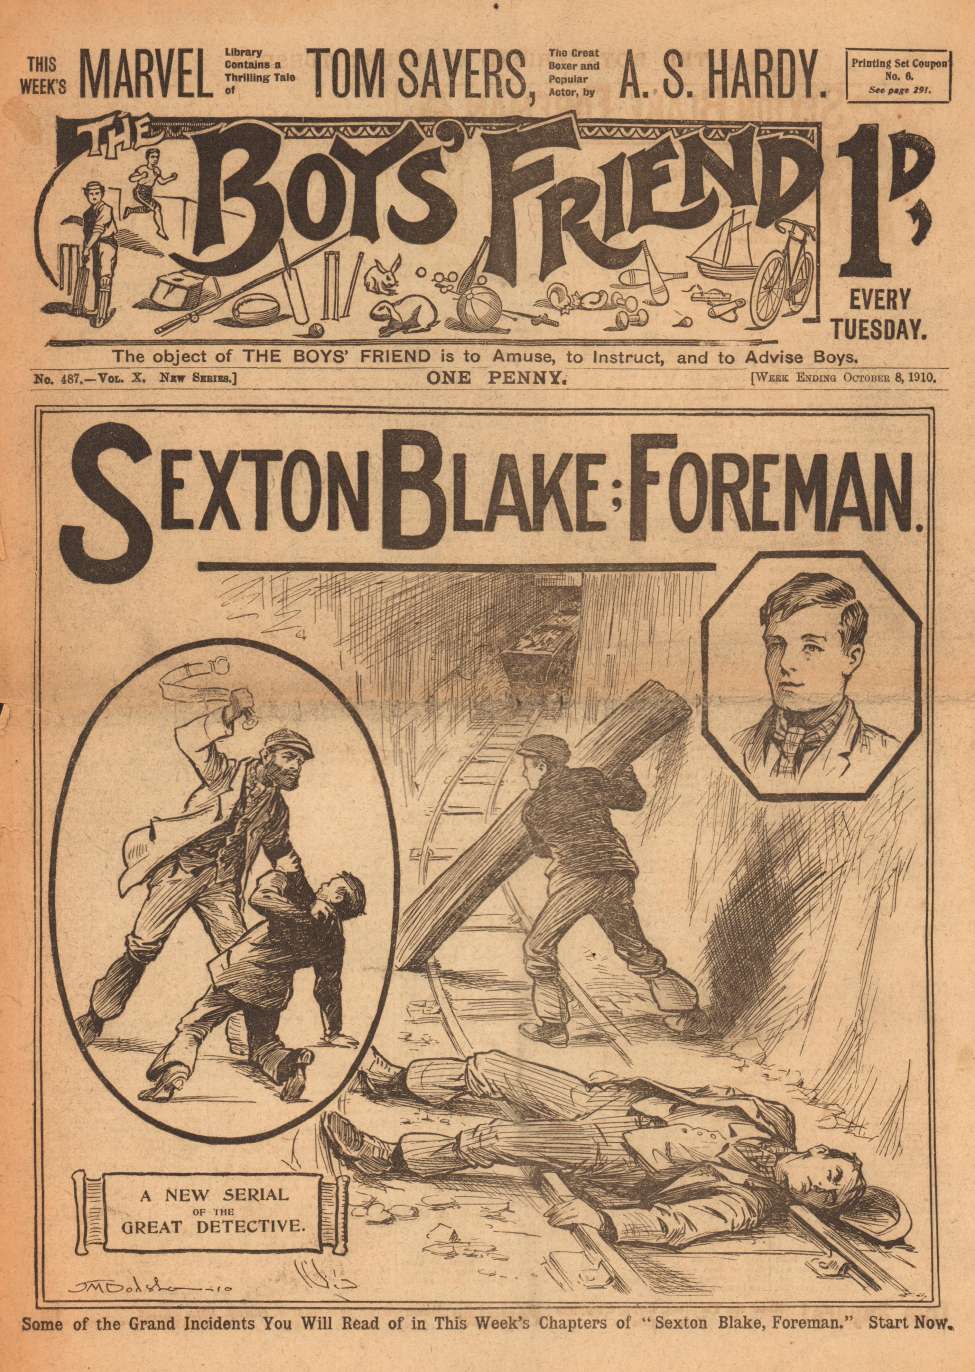 Book Cover For The Boys' Friend 487 - Sexton Blake: Foreman